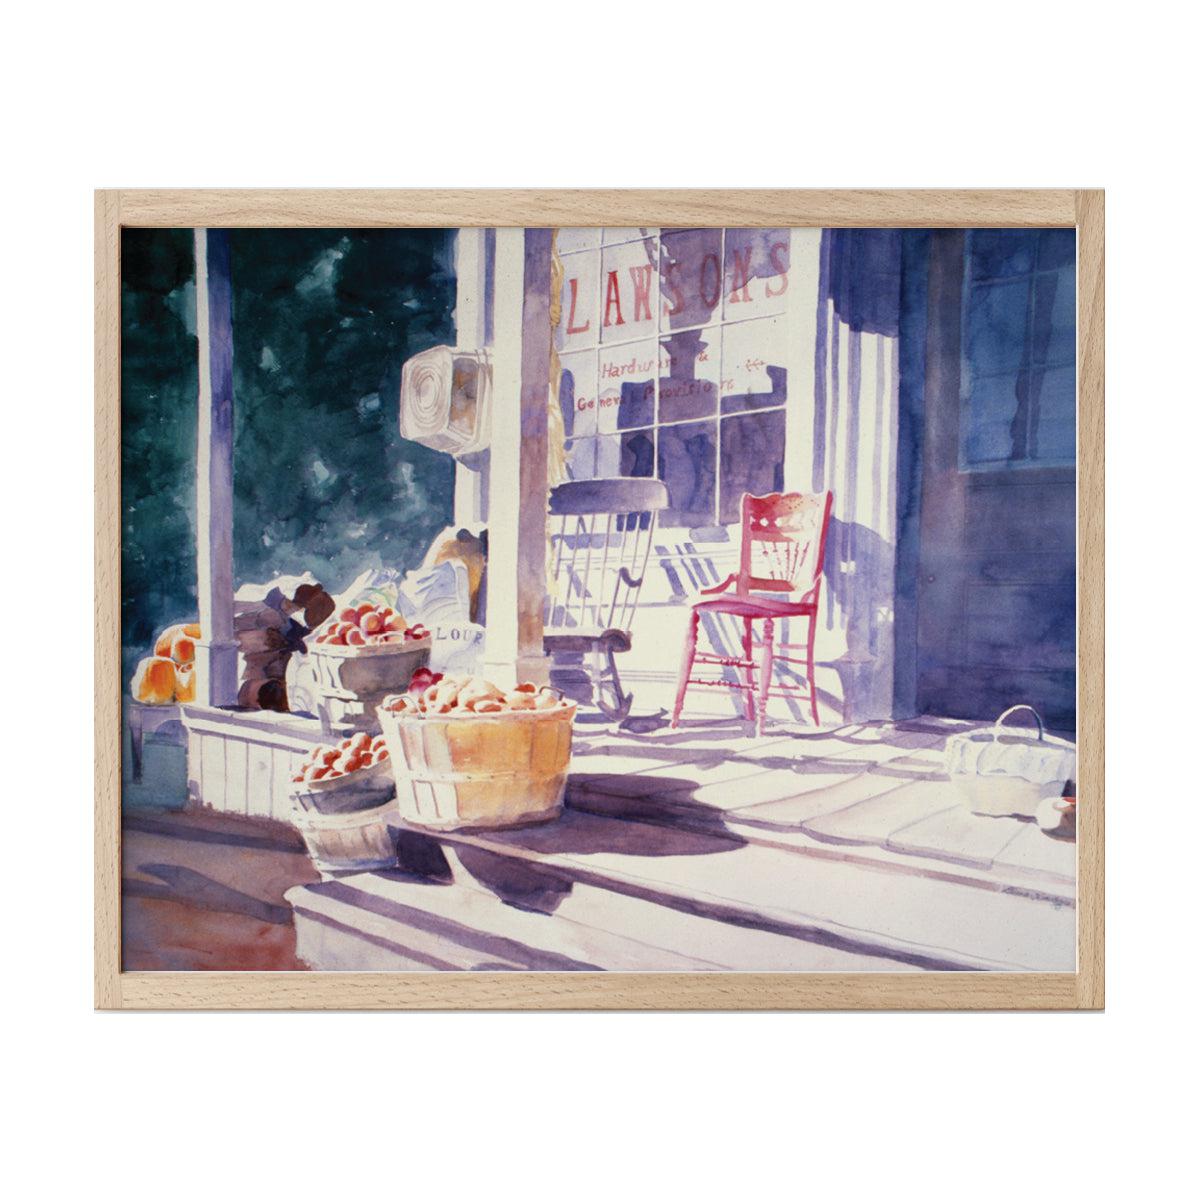 "Lawson's General Store" By Diane Henderson, On Watercolor Paper